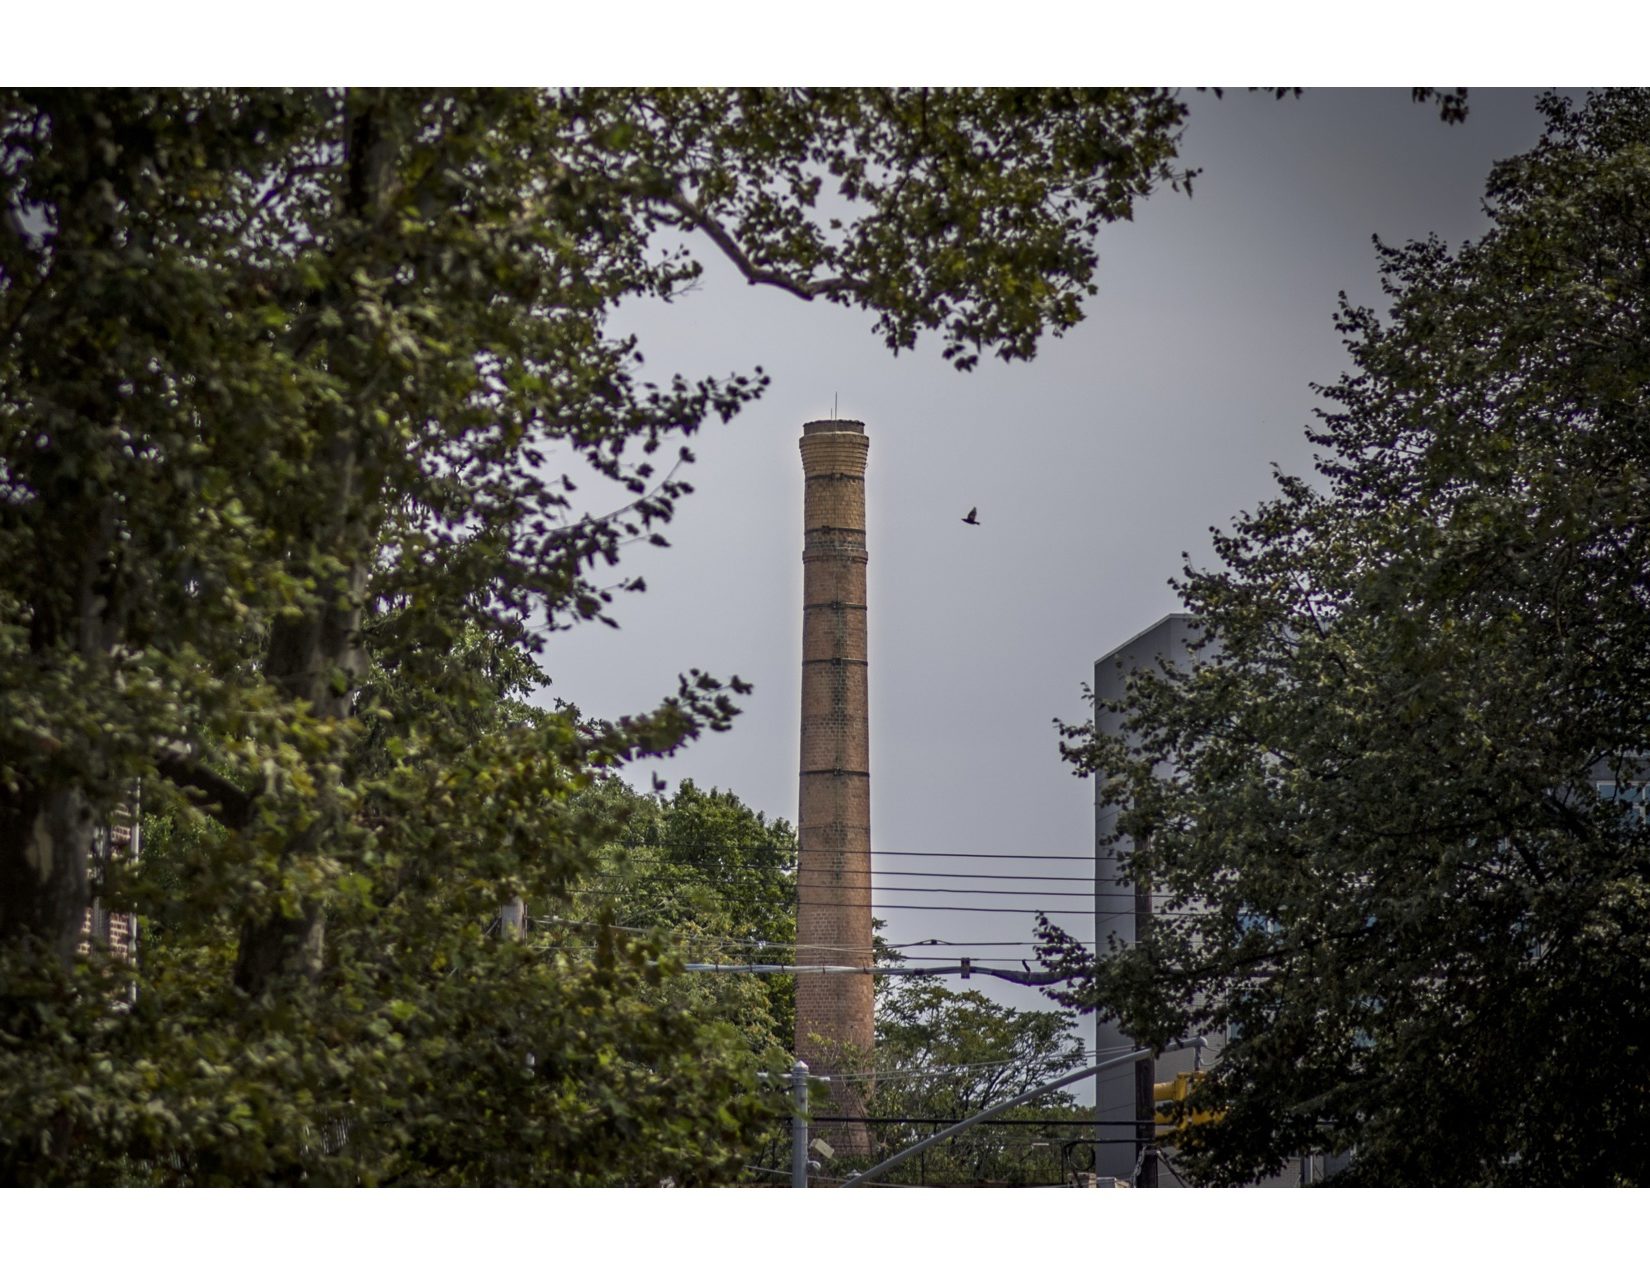 A towering smoke stack at The Vitagraph in New York